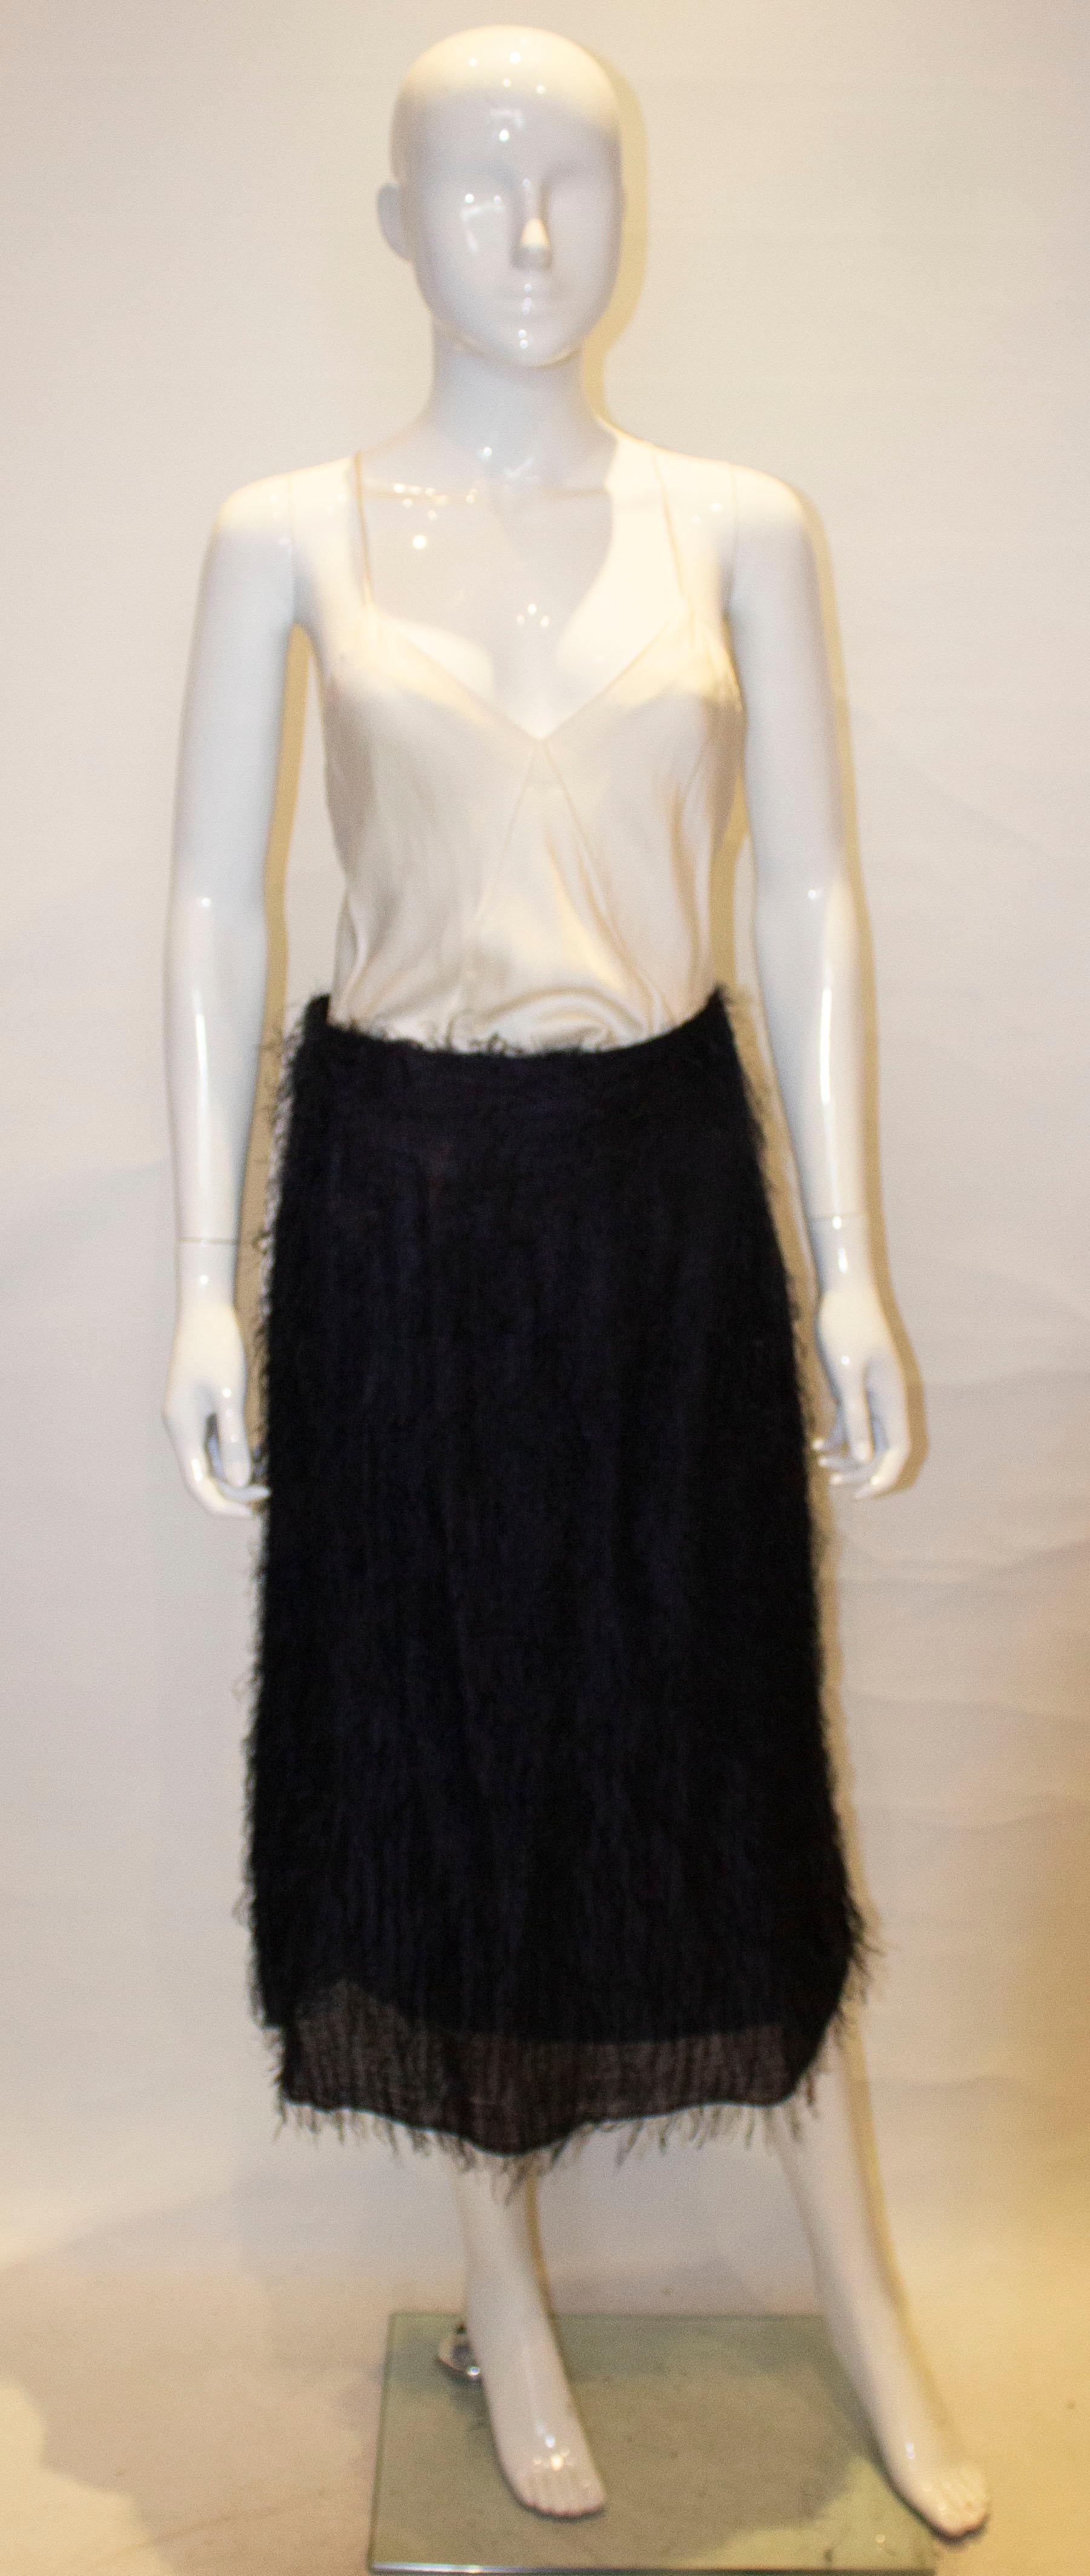 A chic vintage skirt covered in soft tufts. The skirt is fully lined and has a side zip opening.